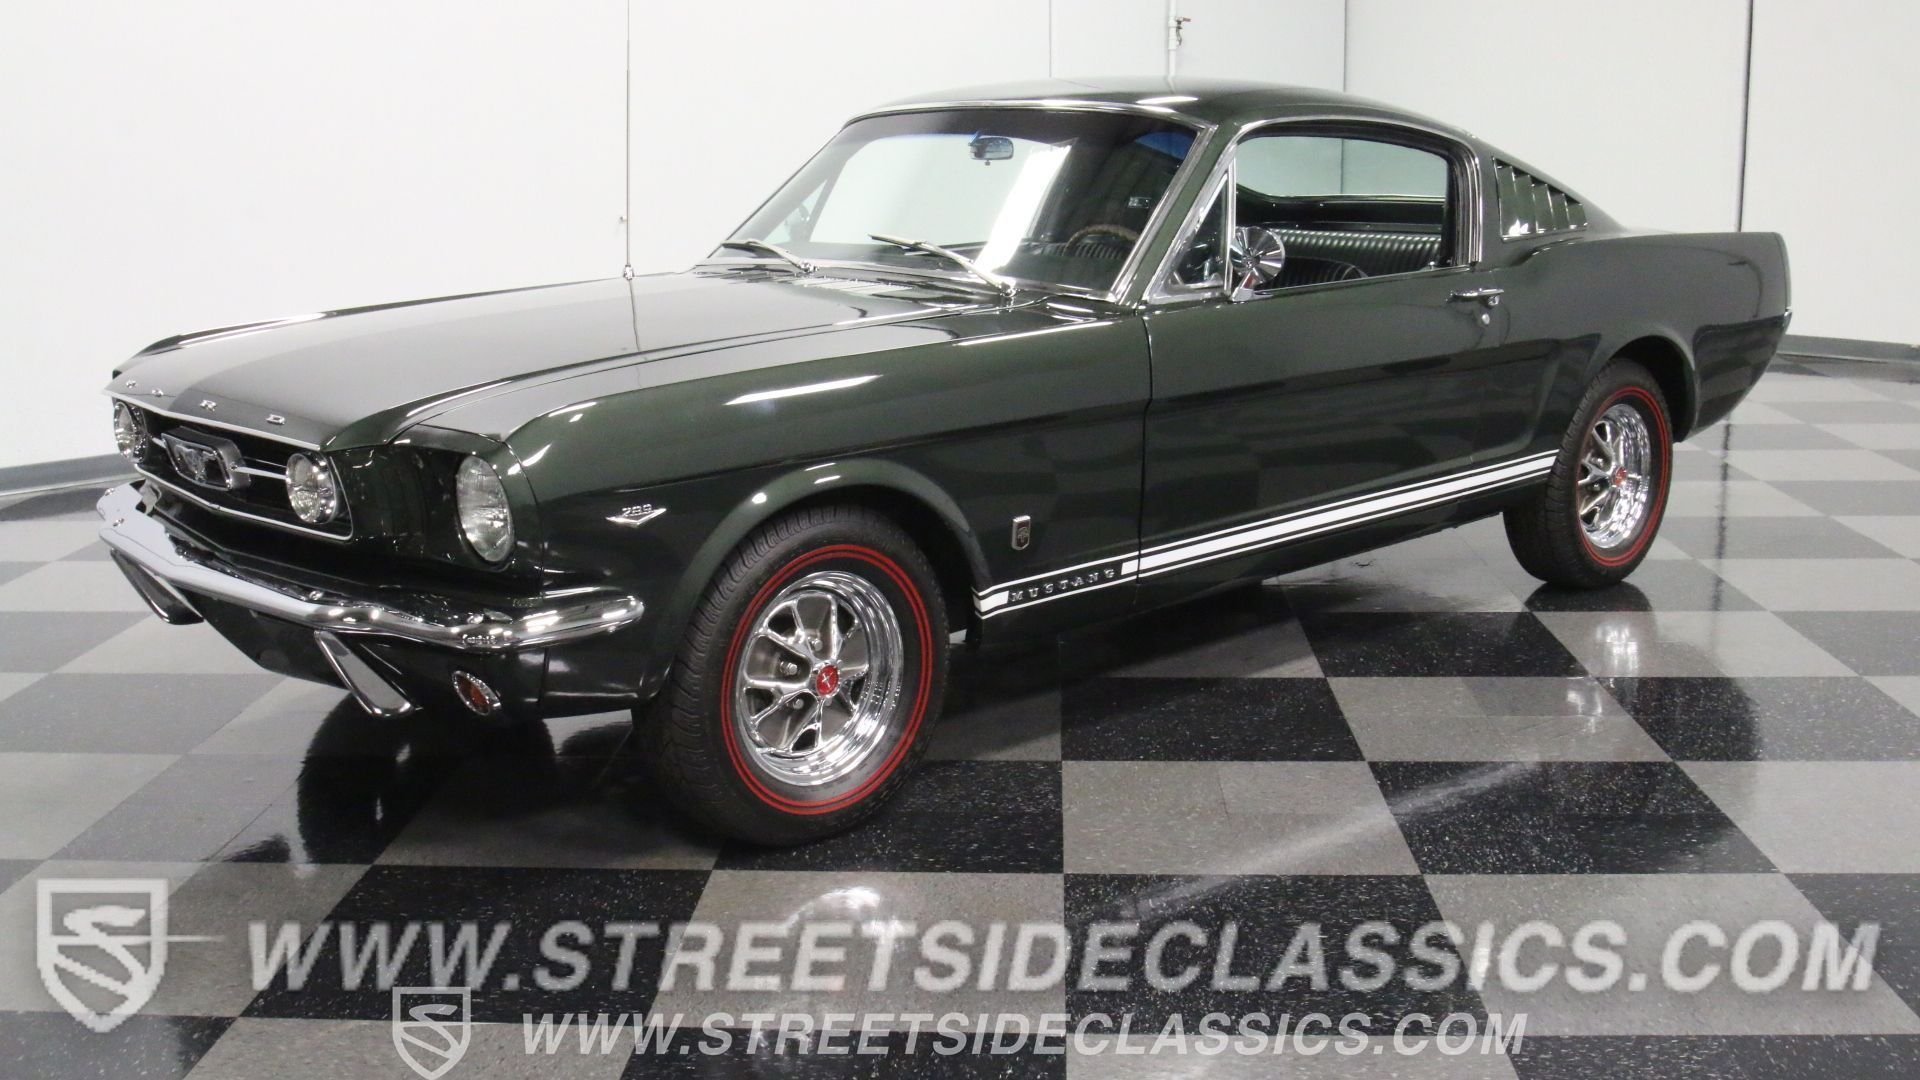 1966 Ford Mustang | Classic Cars for Sale - Streetside Classics